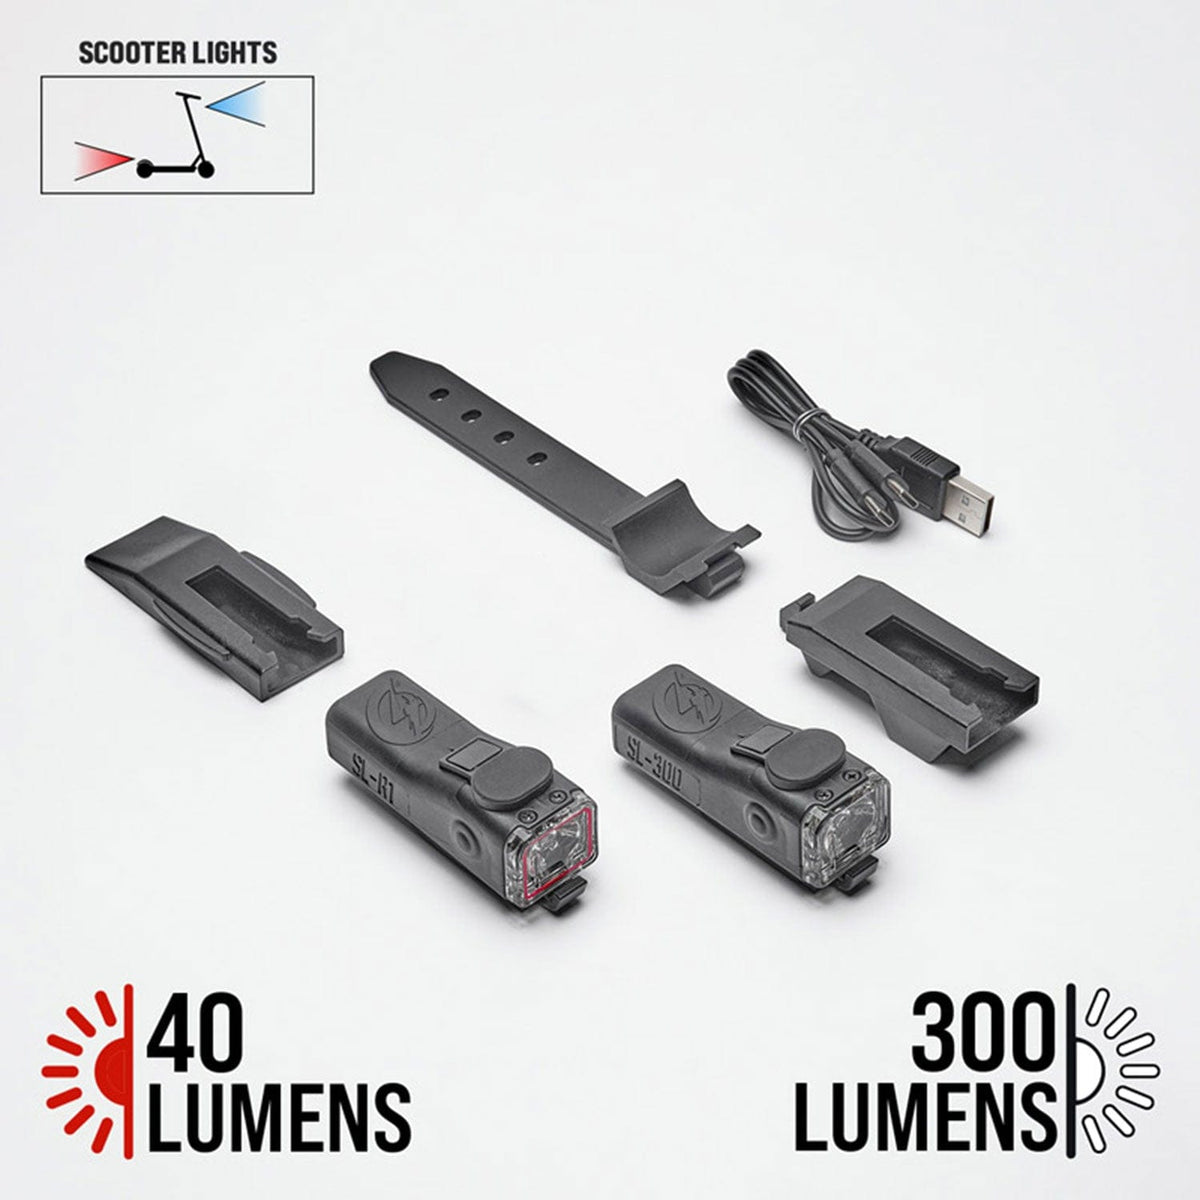 Best Scooter Lights - Handlebar Lights for Electric Scooters